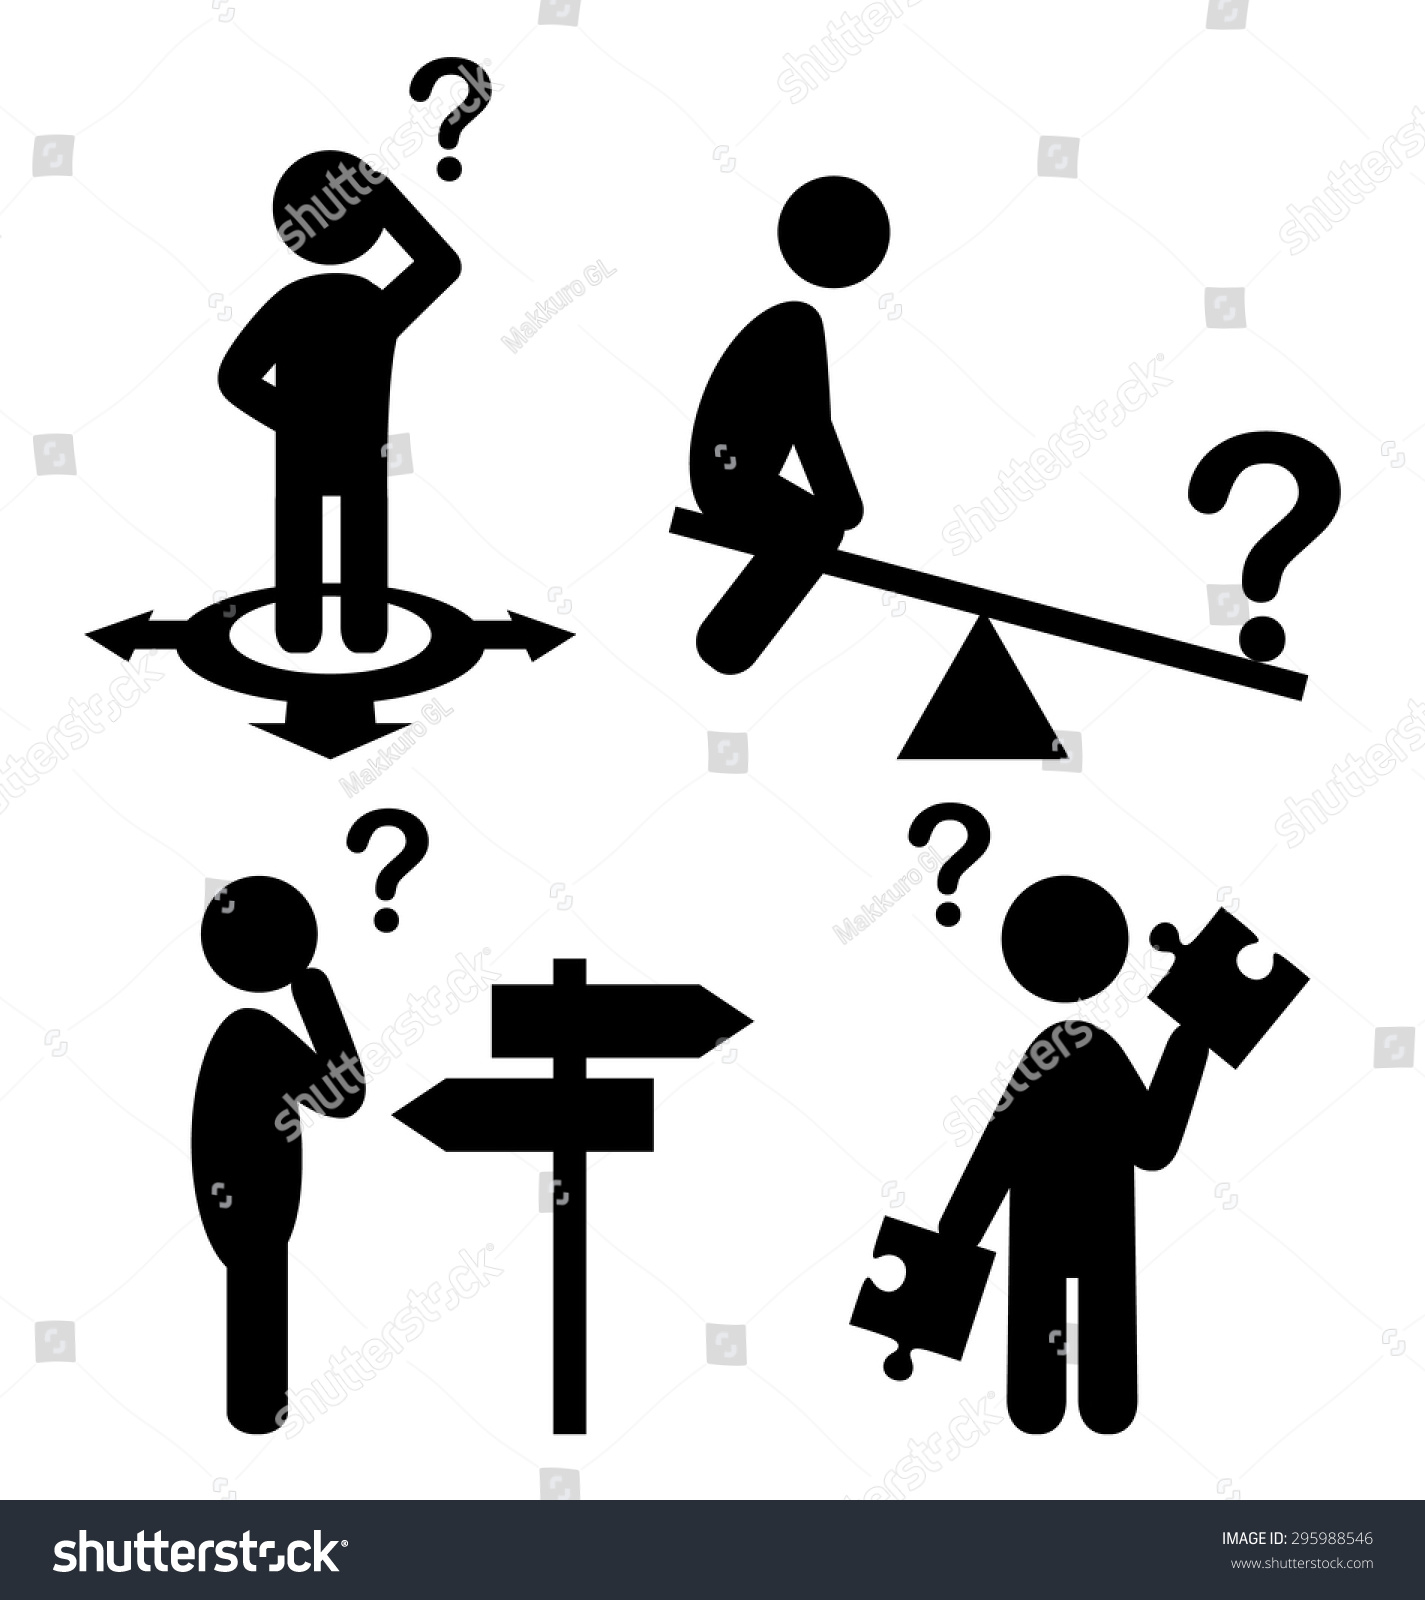 Confusion People With Question Marks Flat Icons Pictogram Isolated On ...